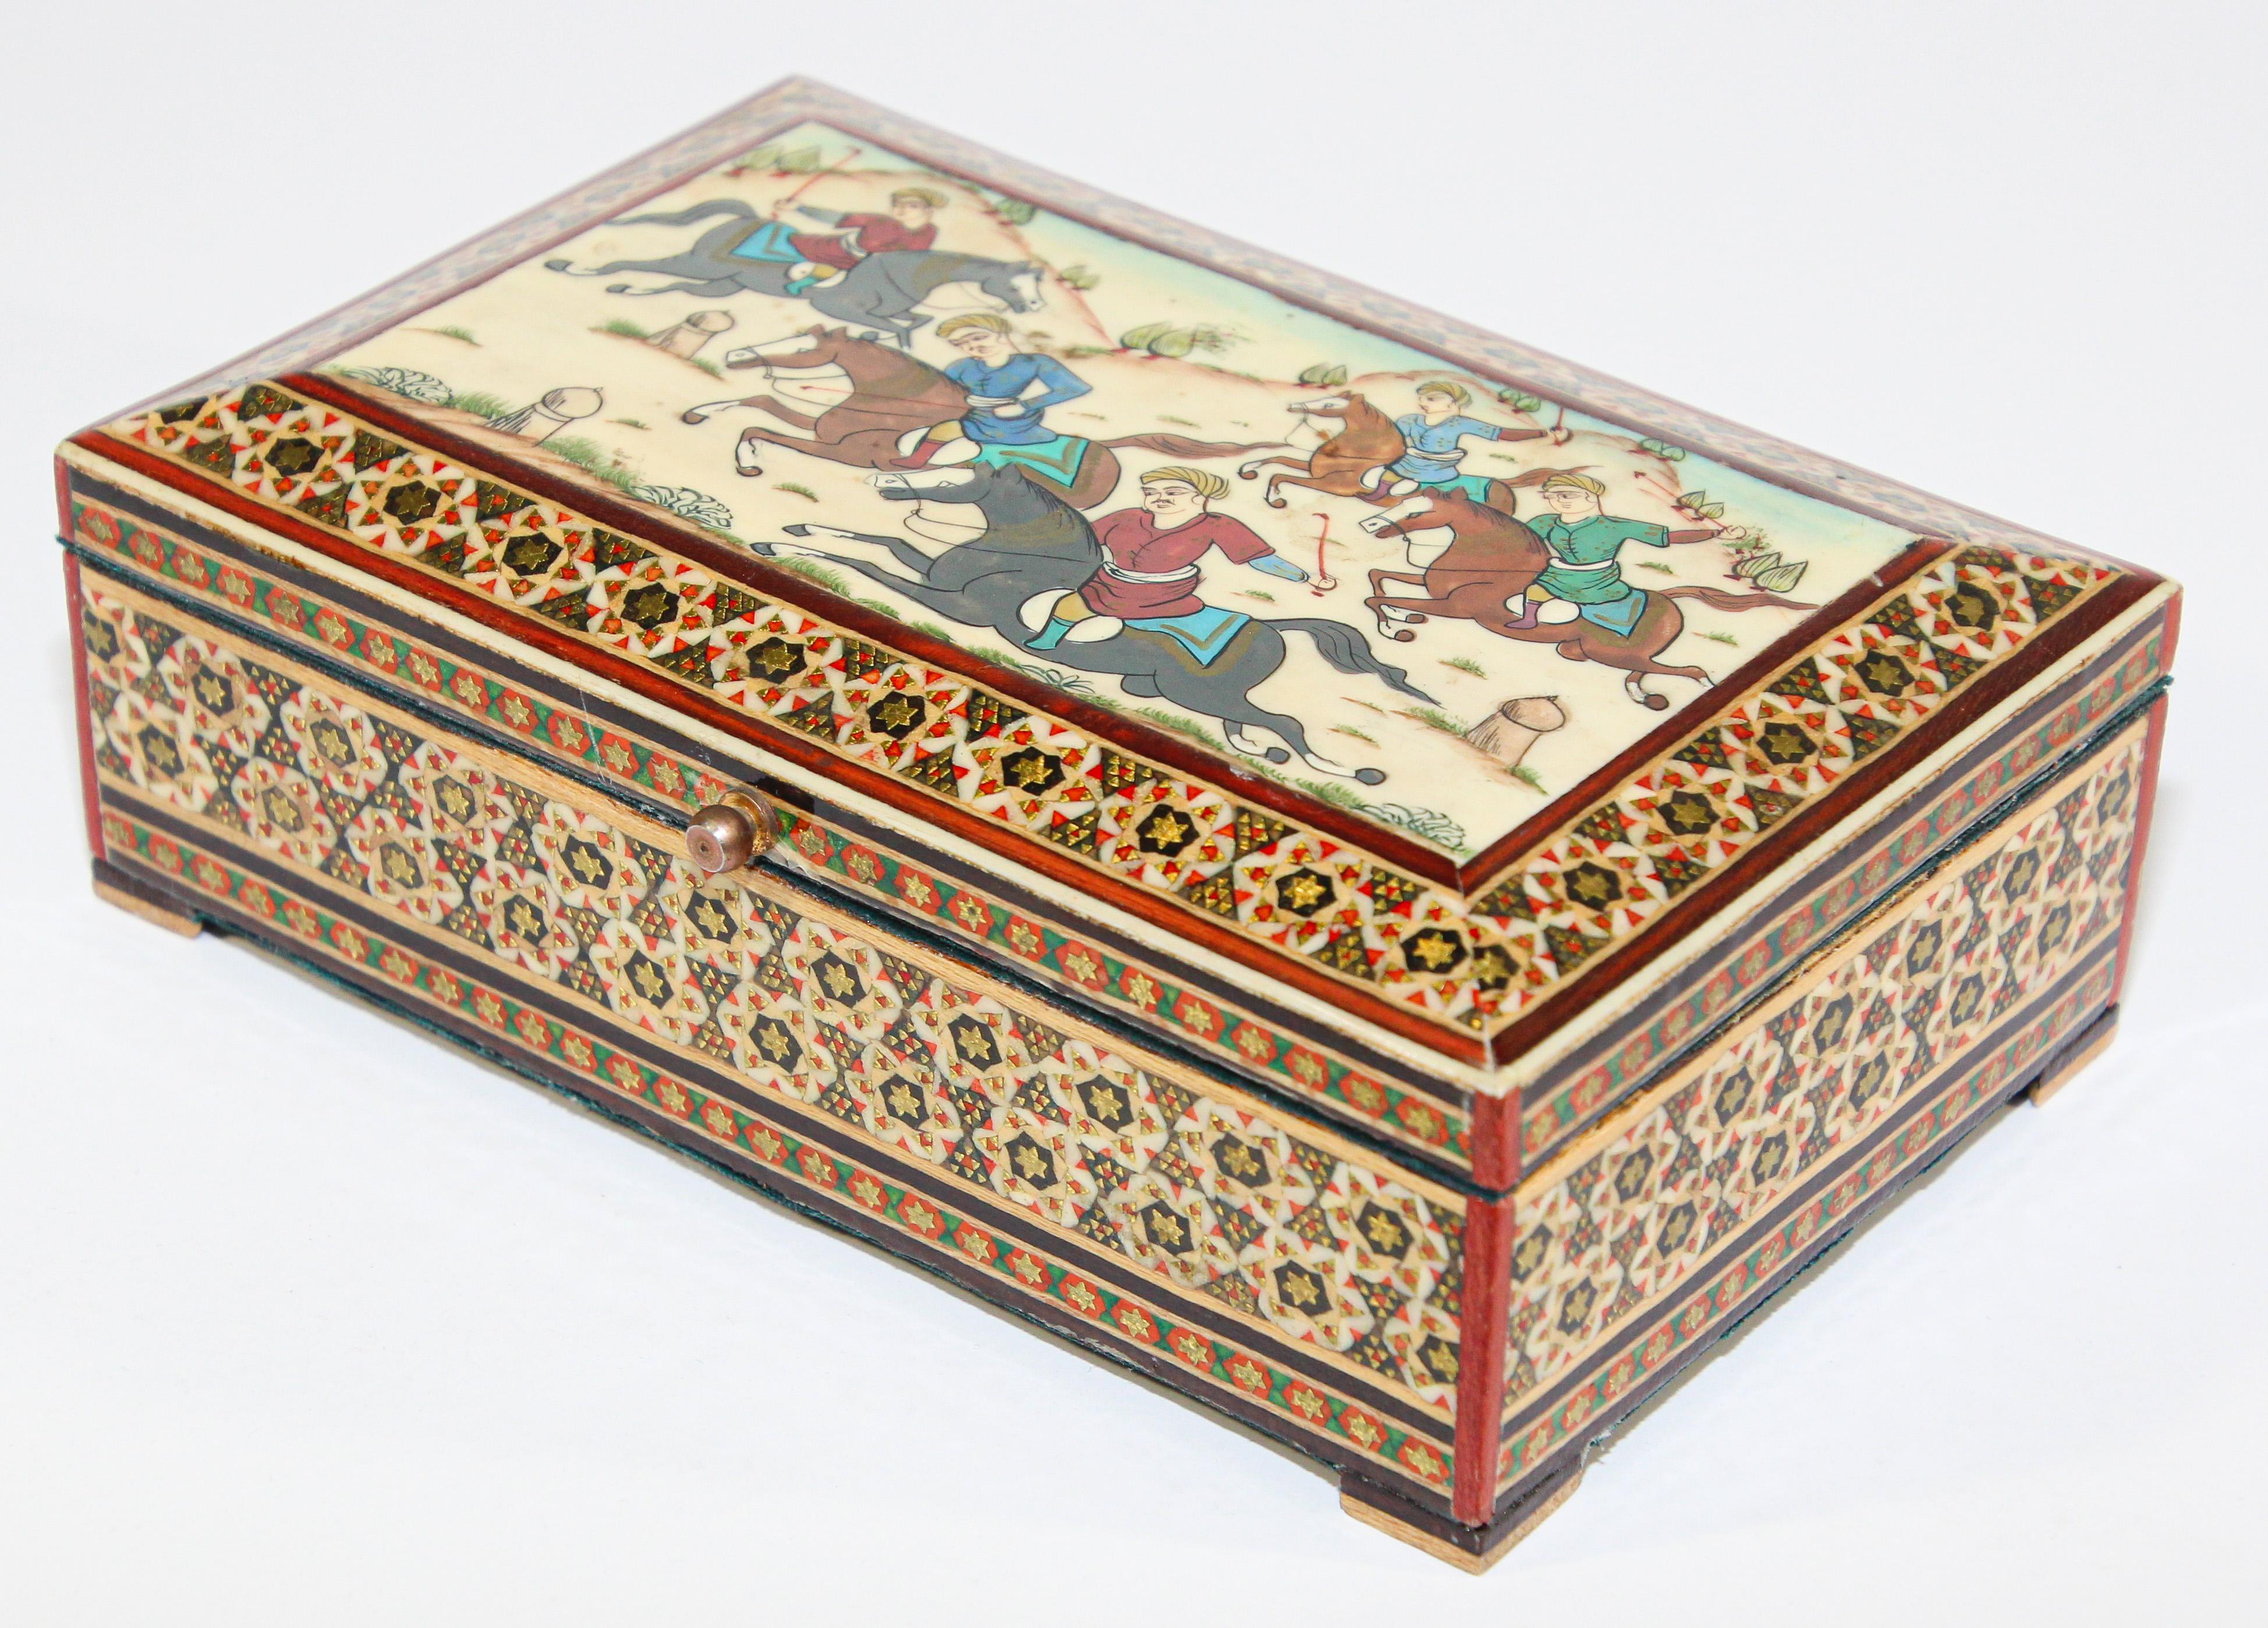 Handcrafted vintage marquetry Indo Persian wood inlay micro mosaic with miniature hand painted scene.
Finely handcrafted khatam wooden box with very delicate micro mosaic marquetry from the ancient Persian technique of inlaying from arrangements of